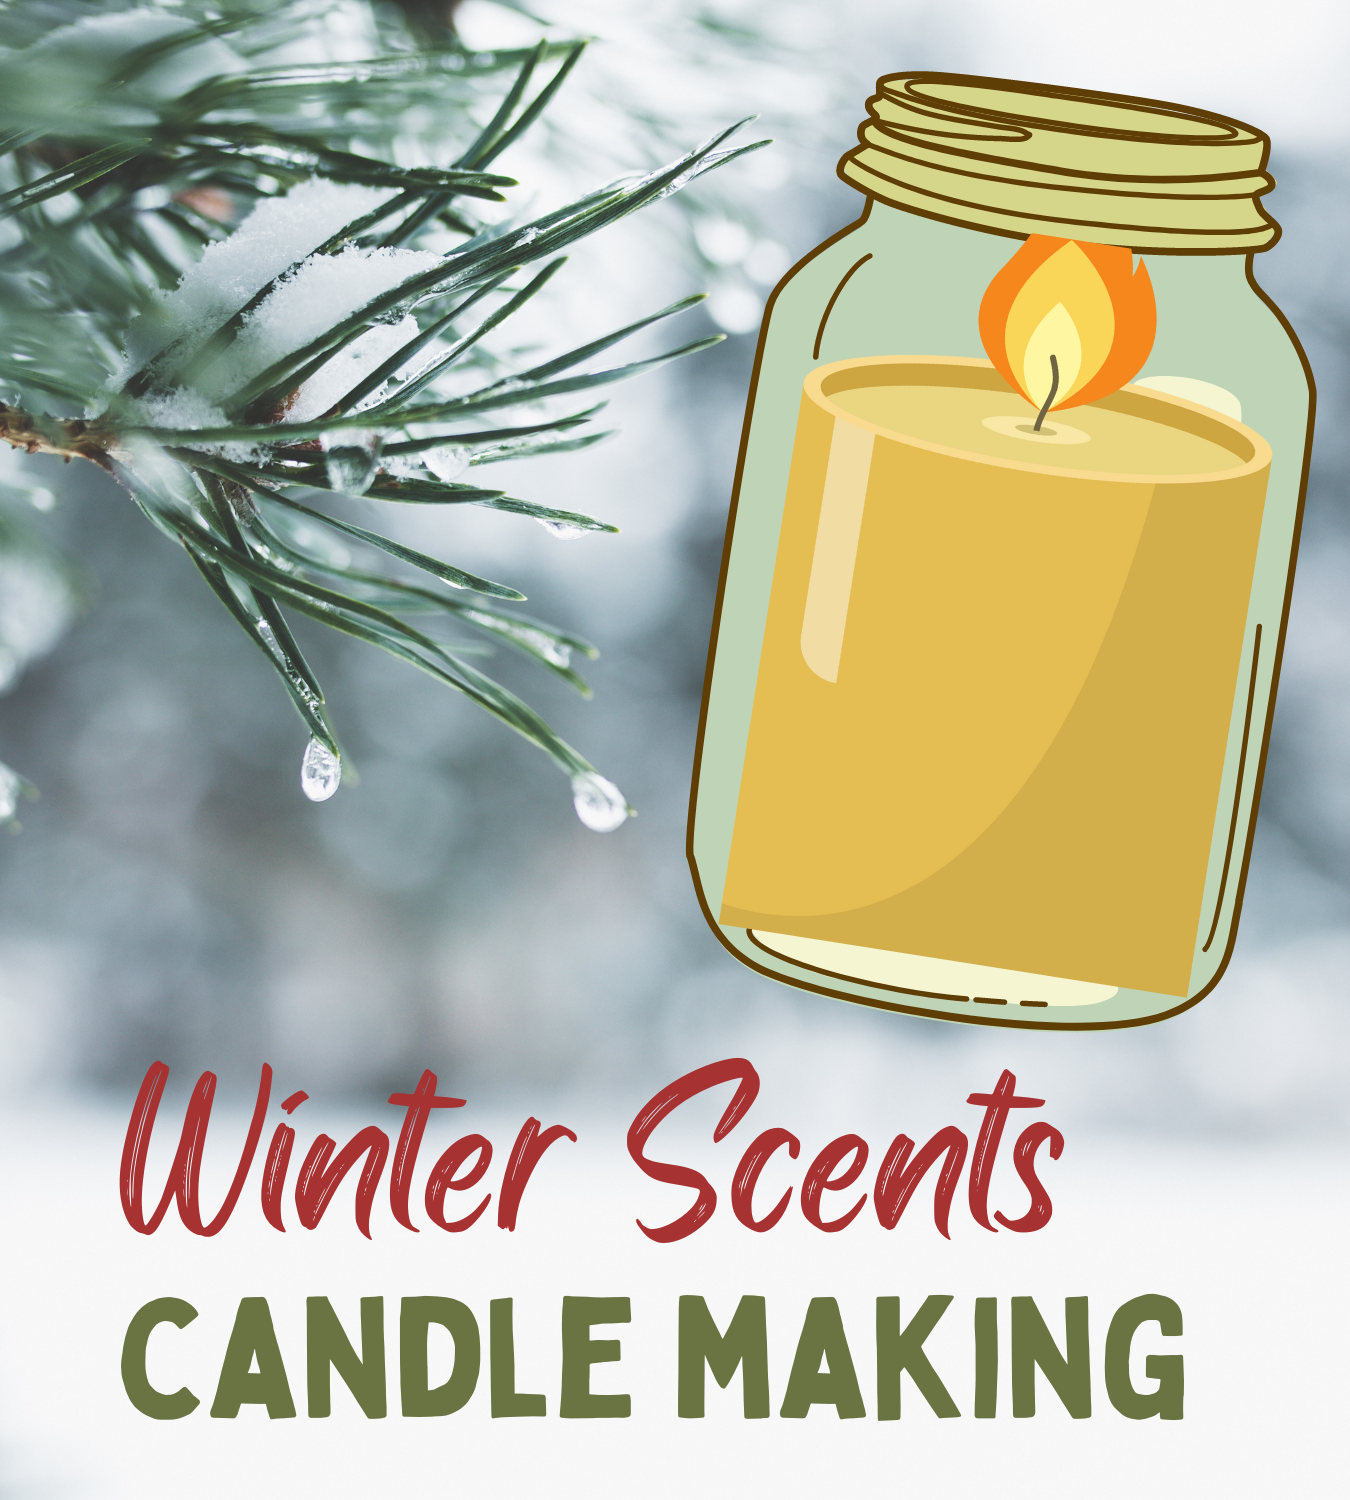 Winter Scents Candle Making